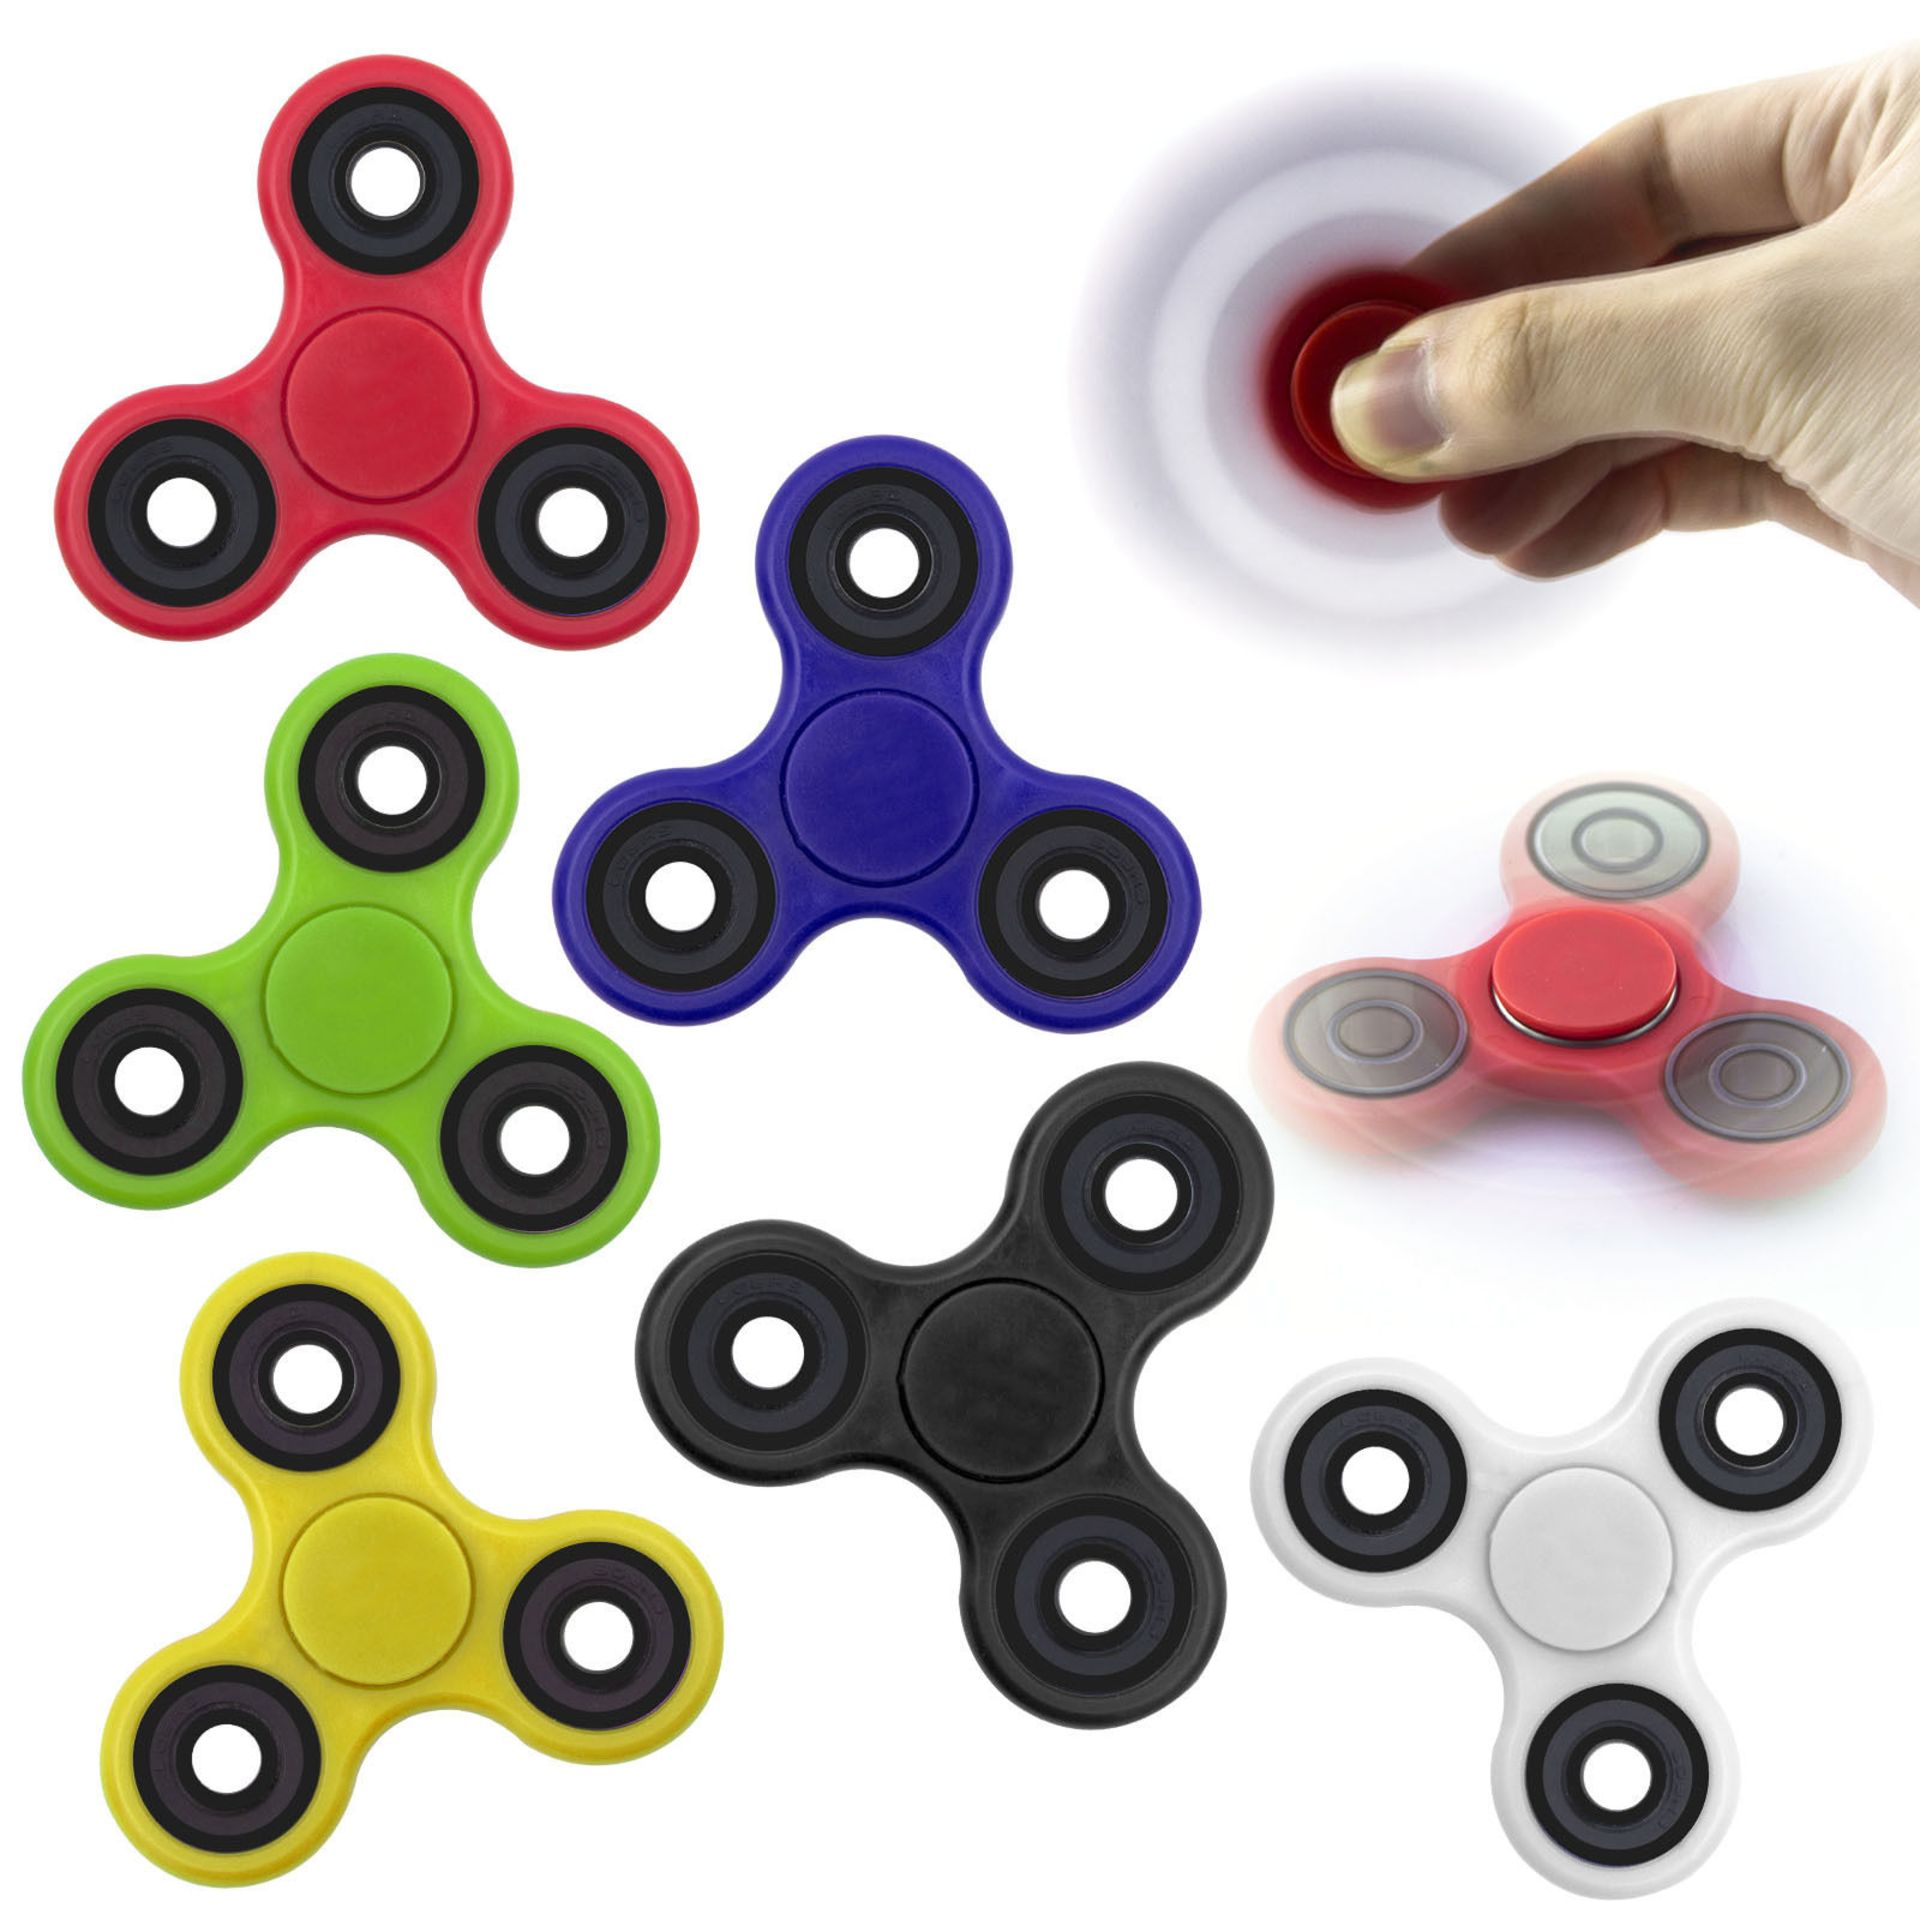 20 x Fidget Spinners. Various Colours Including: Black, Orange, Blue & Yellow. RRP £9.99 each.